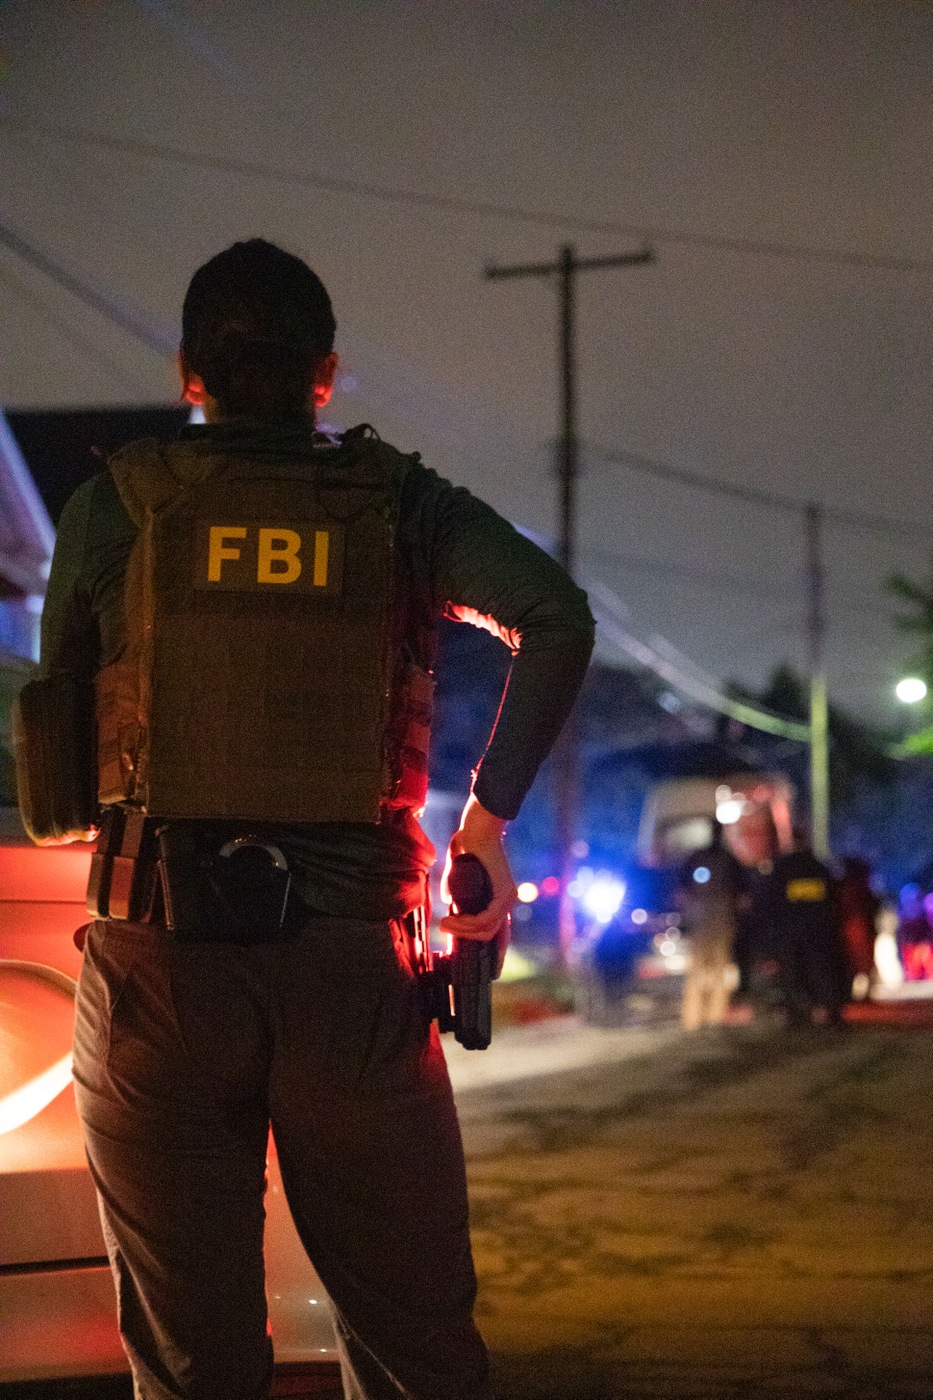 An FBI agent supports an operation targeting a drug trafficking organization based out of Youngstown, Ohio.